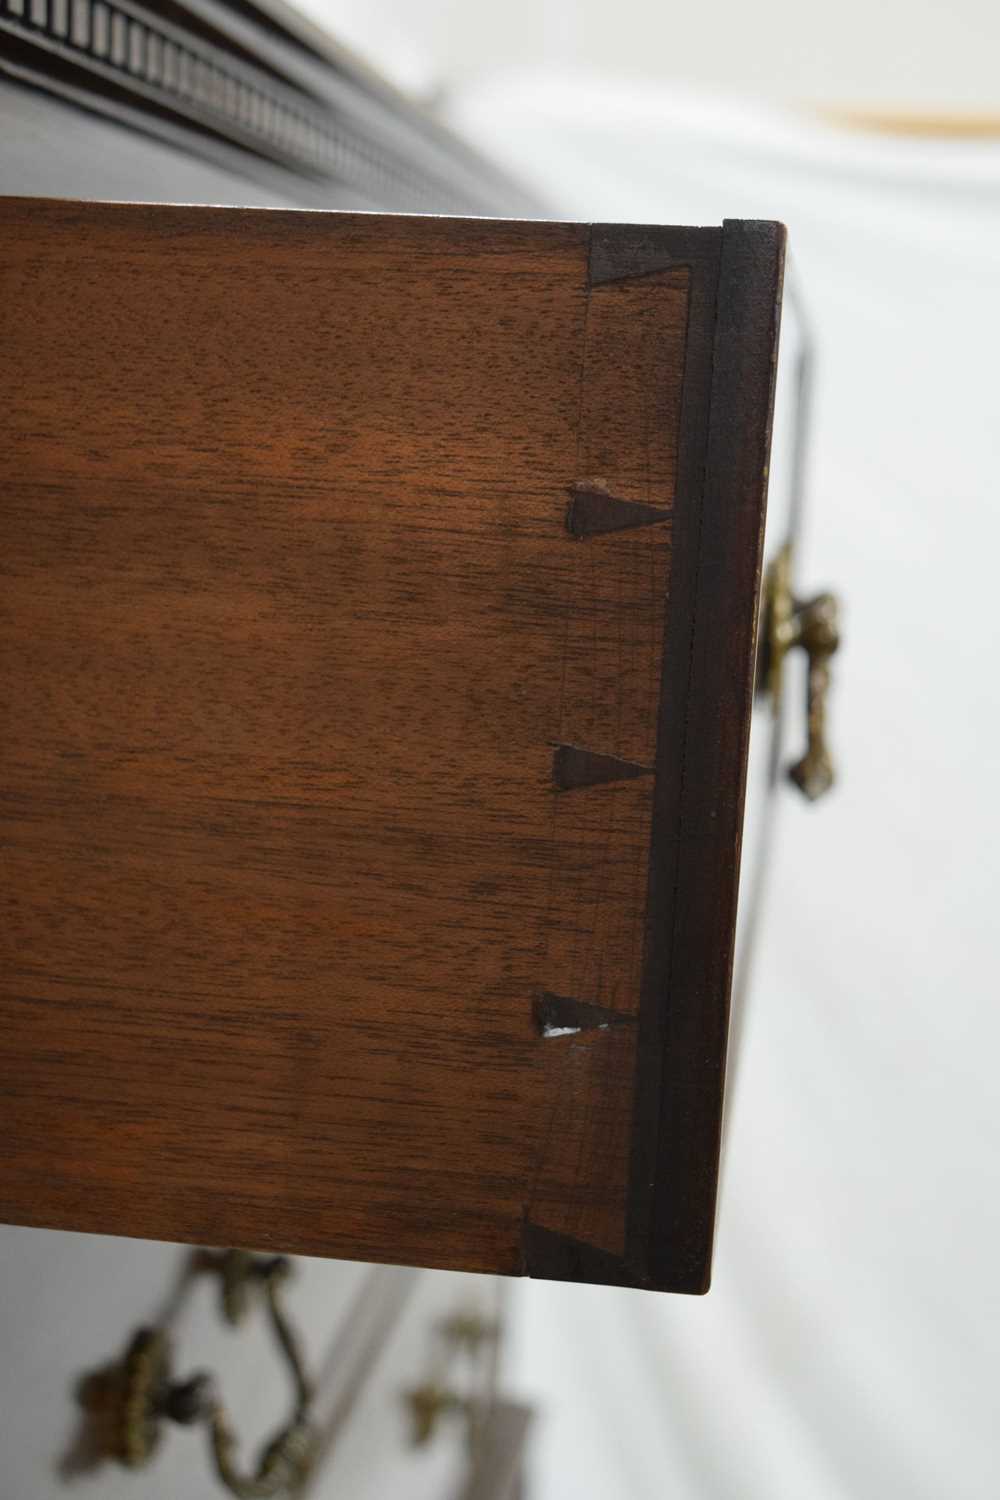 Early 20th century mahogany chest-on-chest or tallboy - Image 5 of 13